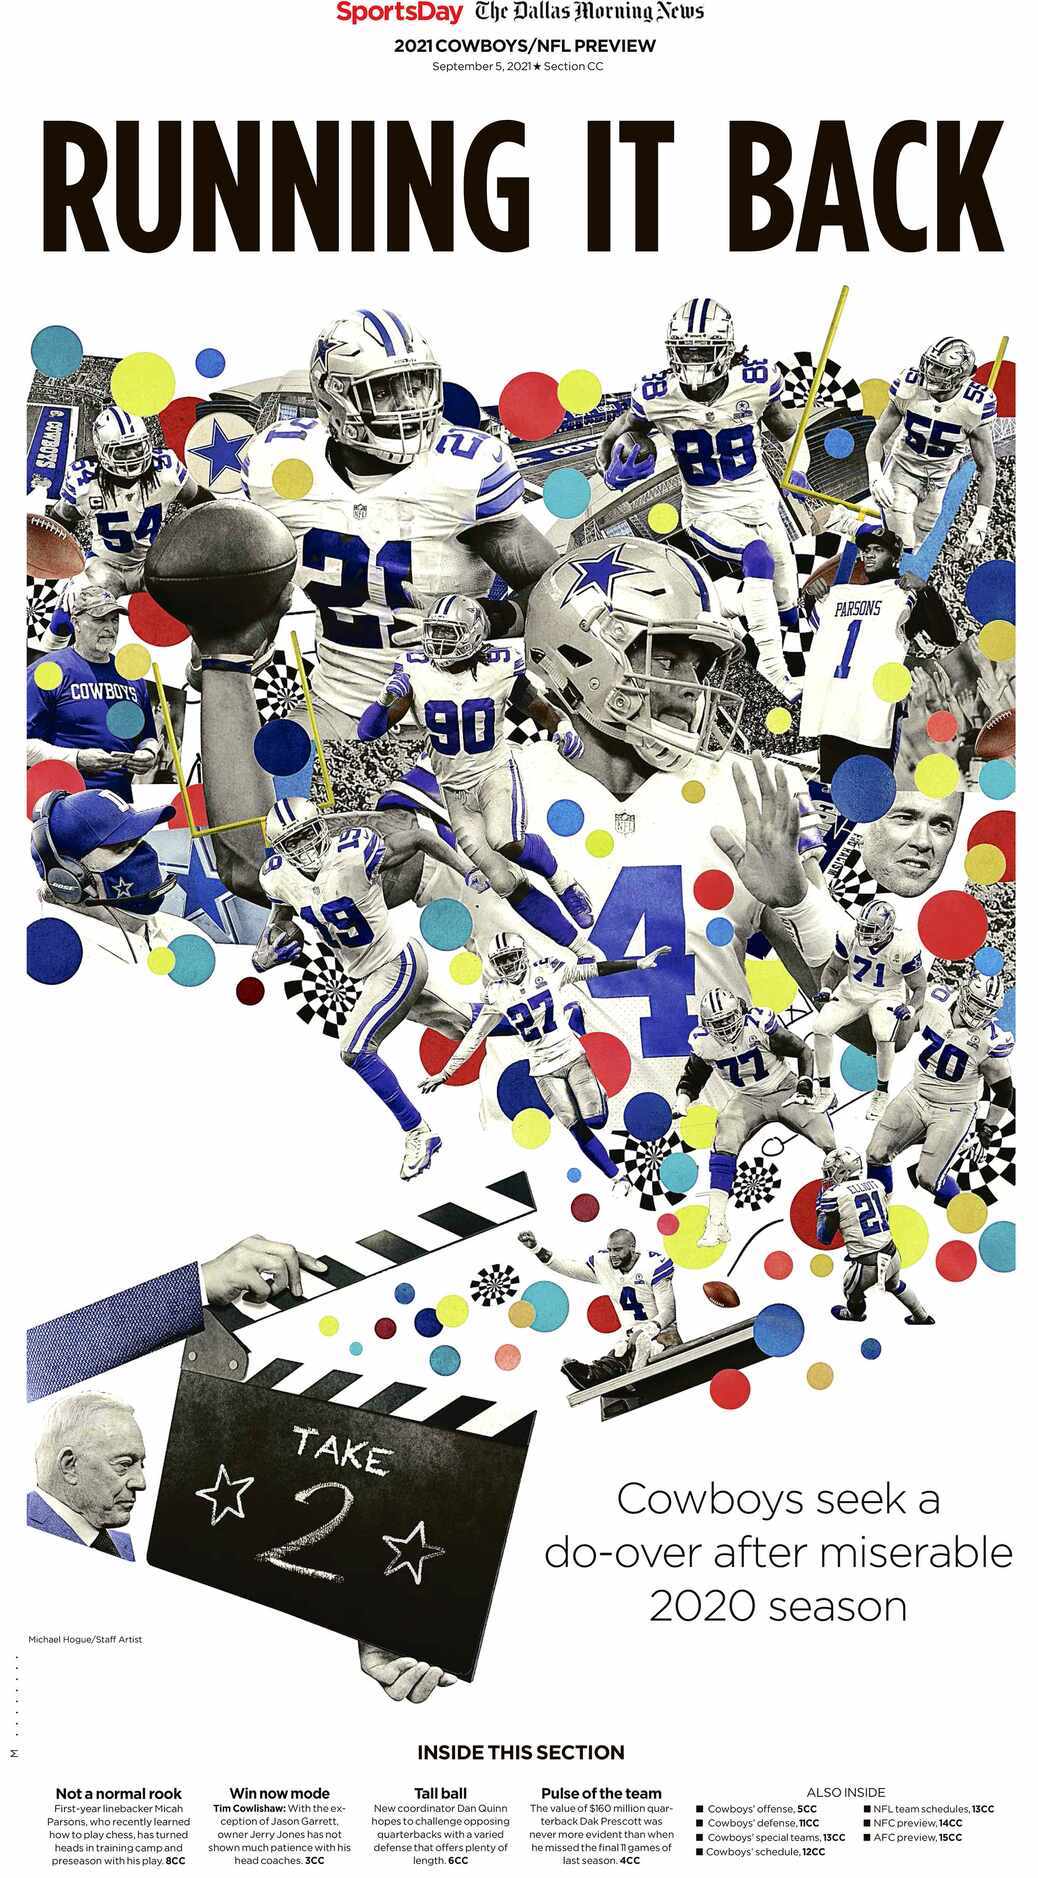 The cover of The Dallas Morning News' Cowboys preview section in 2021.